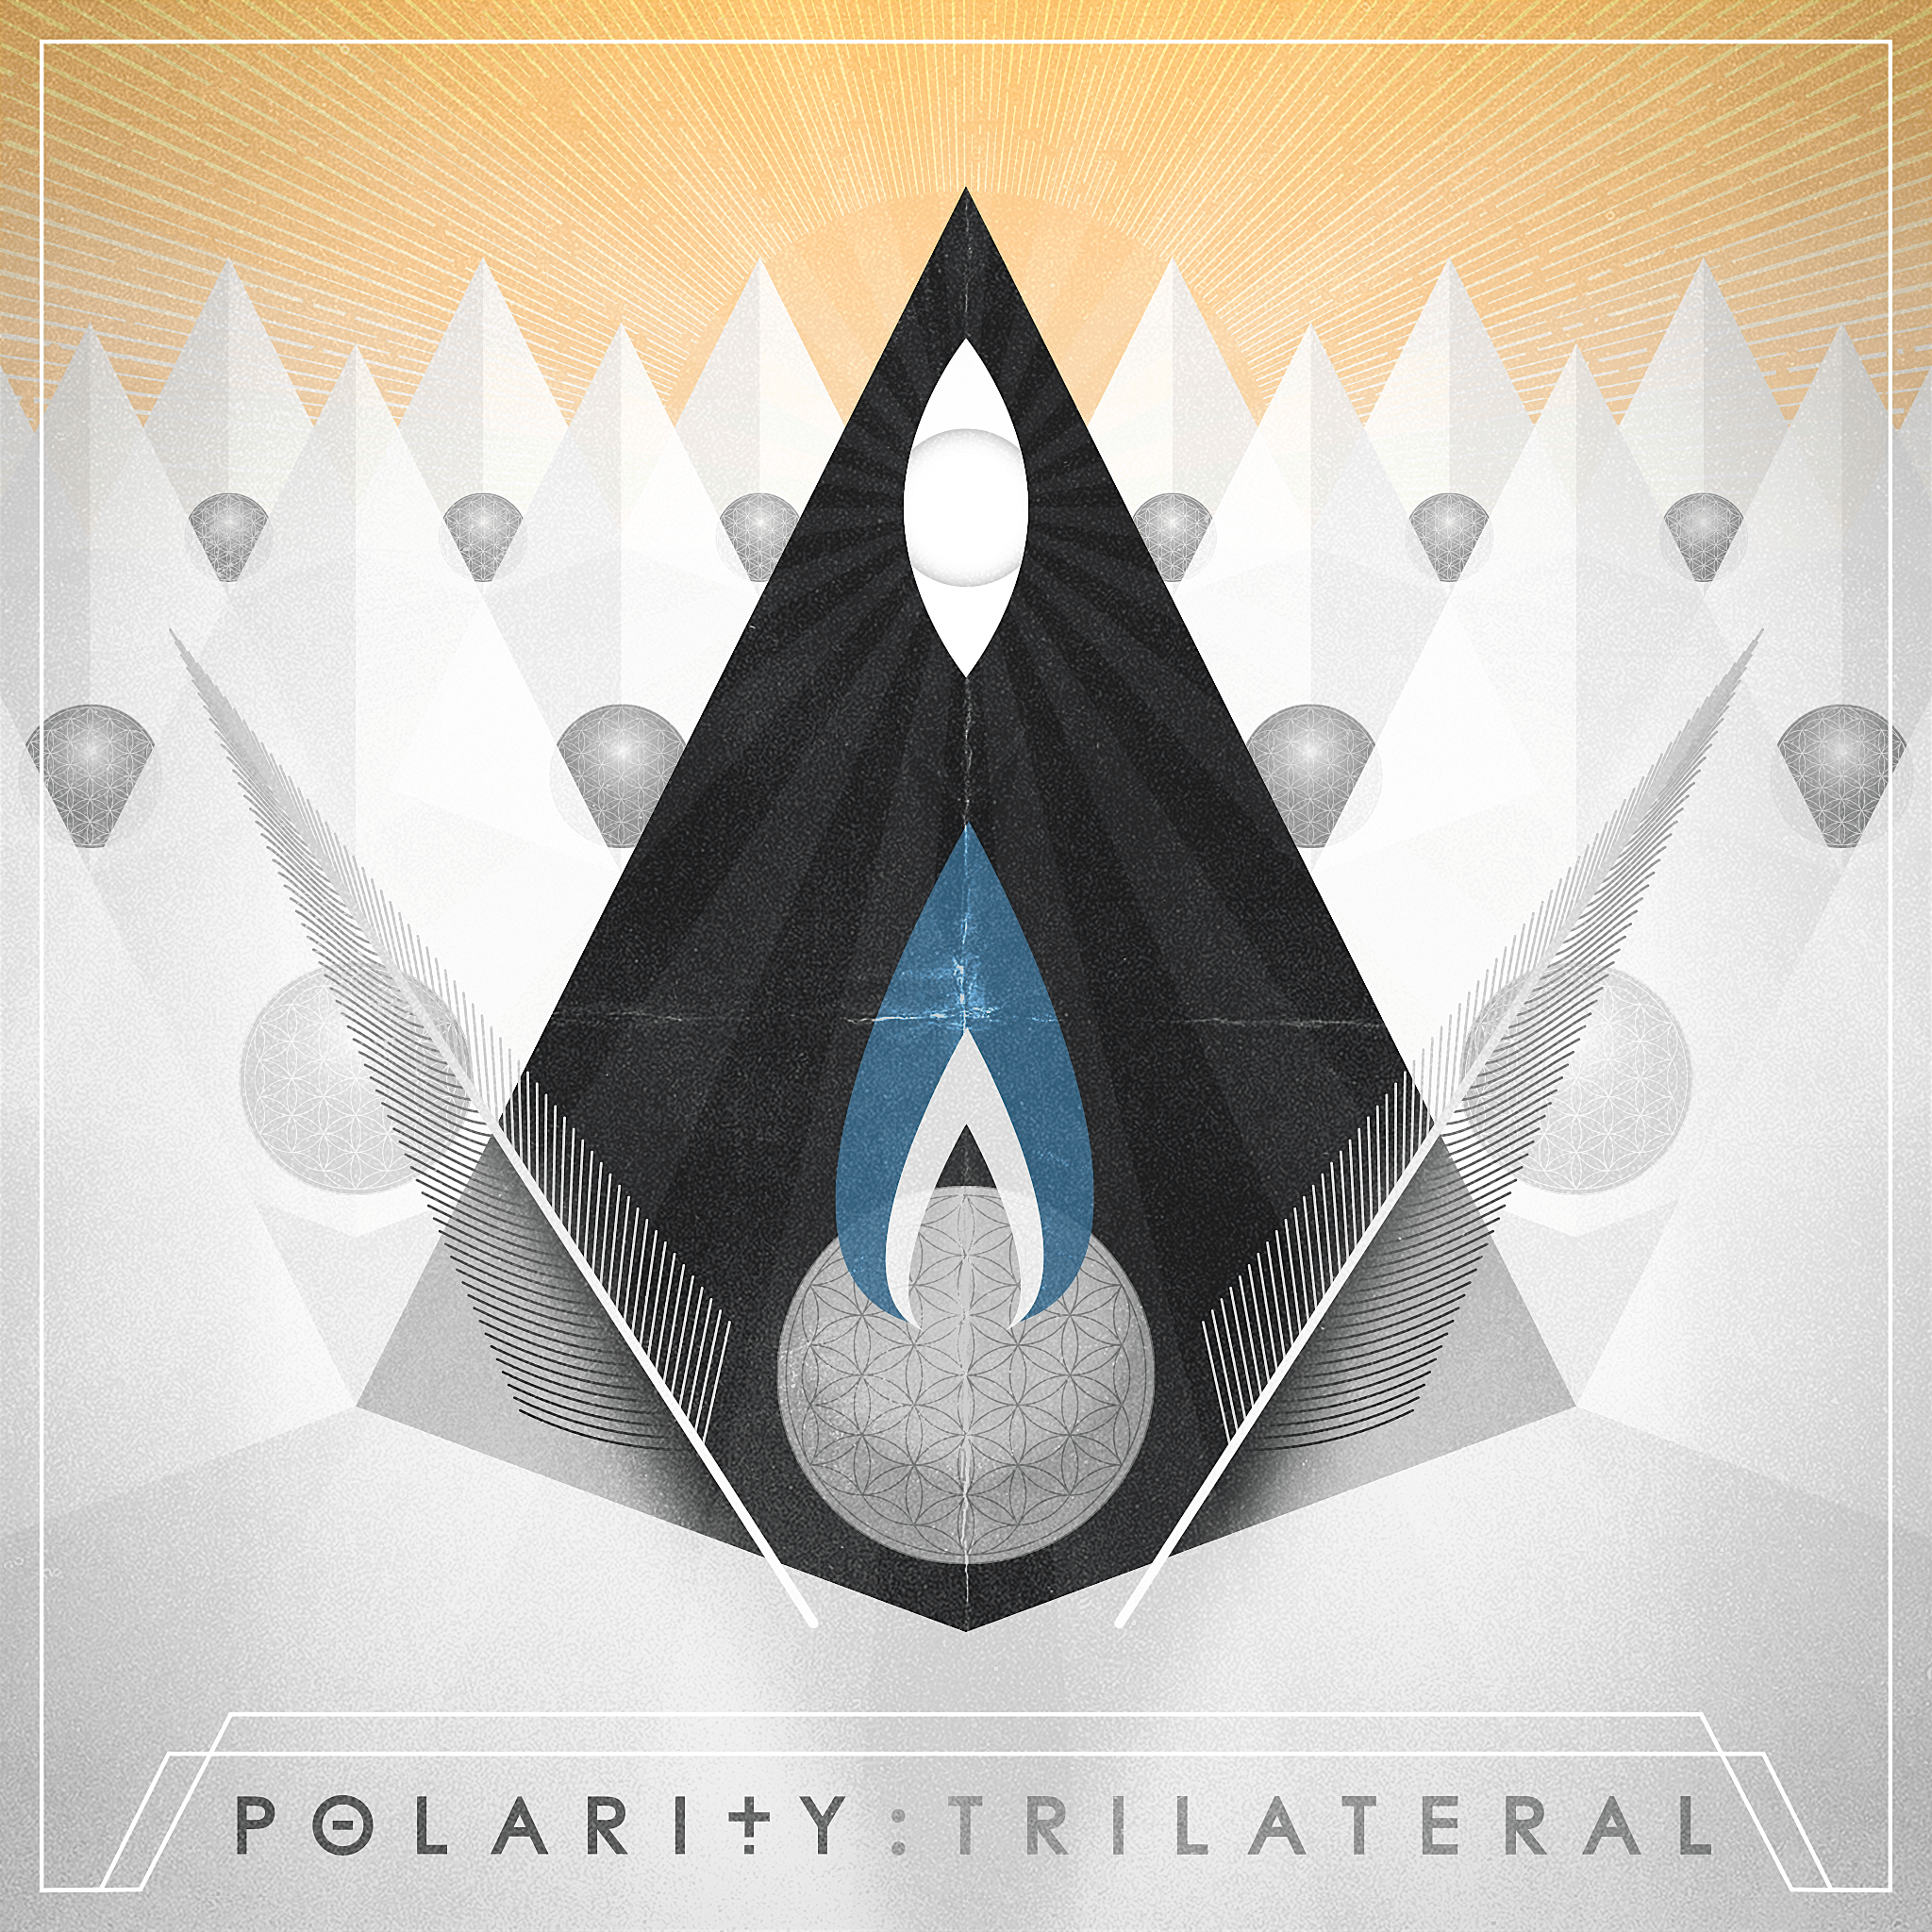 Trilateral EP